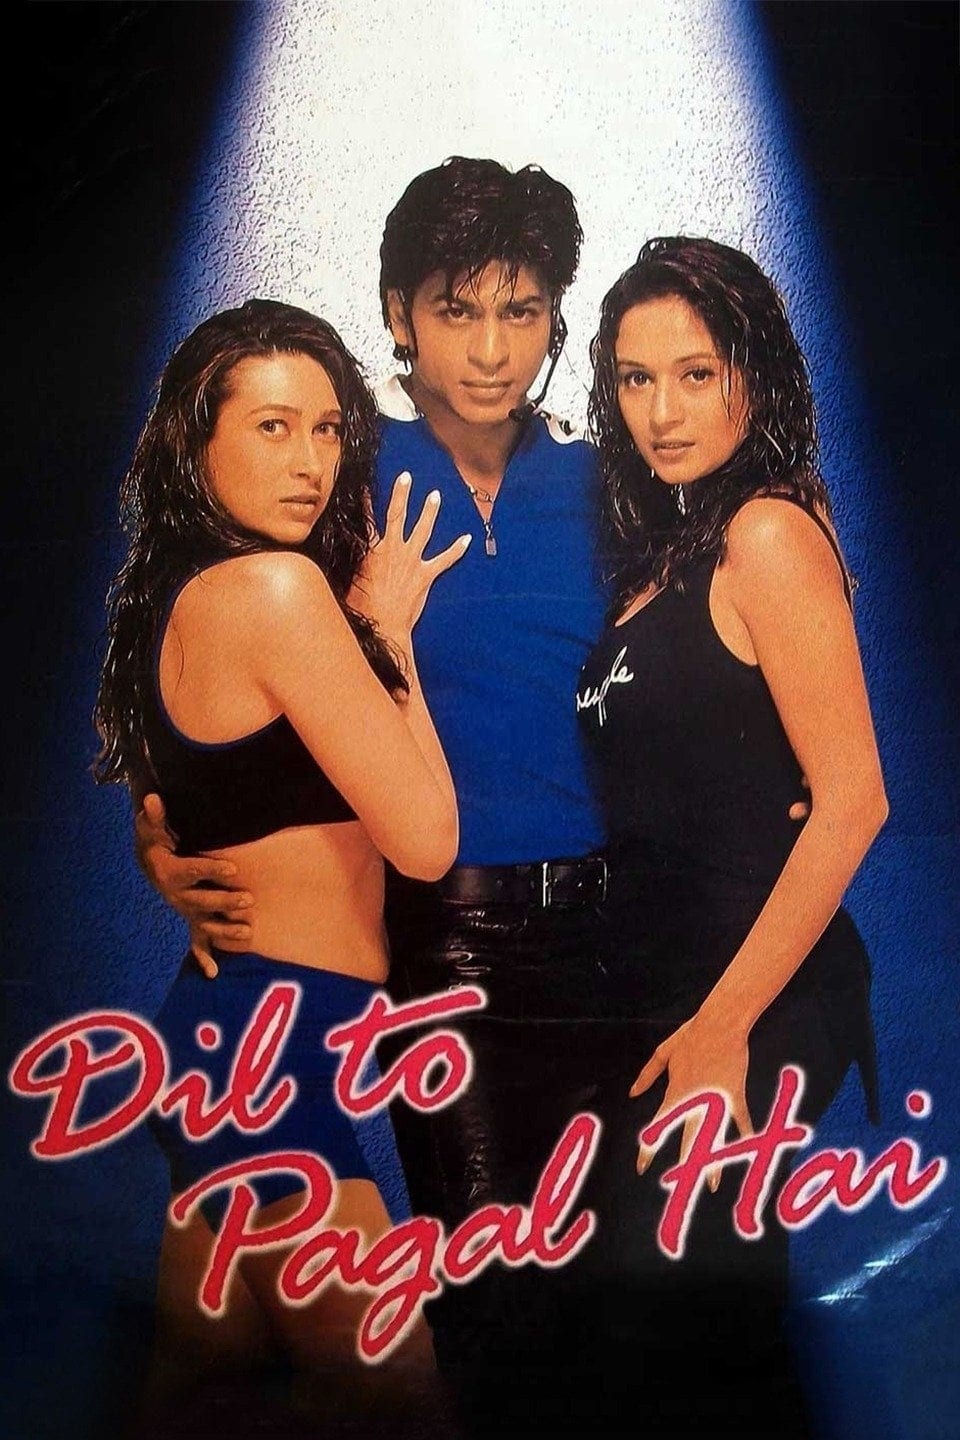 Poster for the movie "Dil To Pagal Hai"